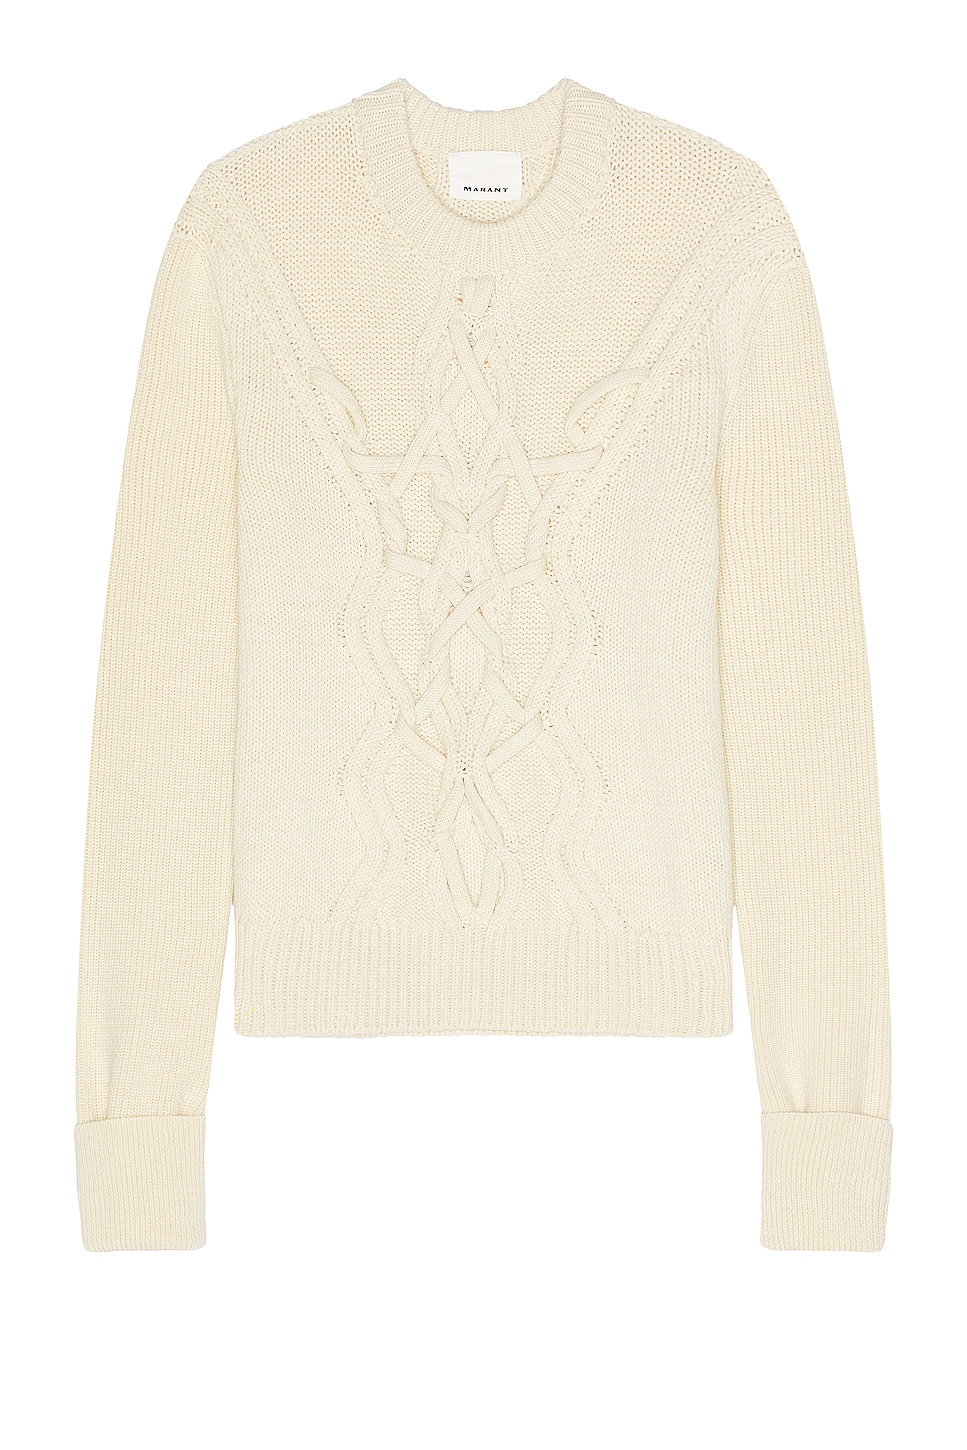 Image 1 of Isabel Marant Tristan Crafty Cable Knit Sweater in Ecru